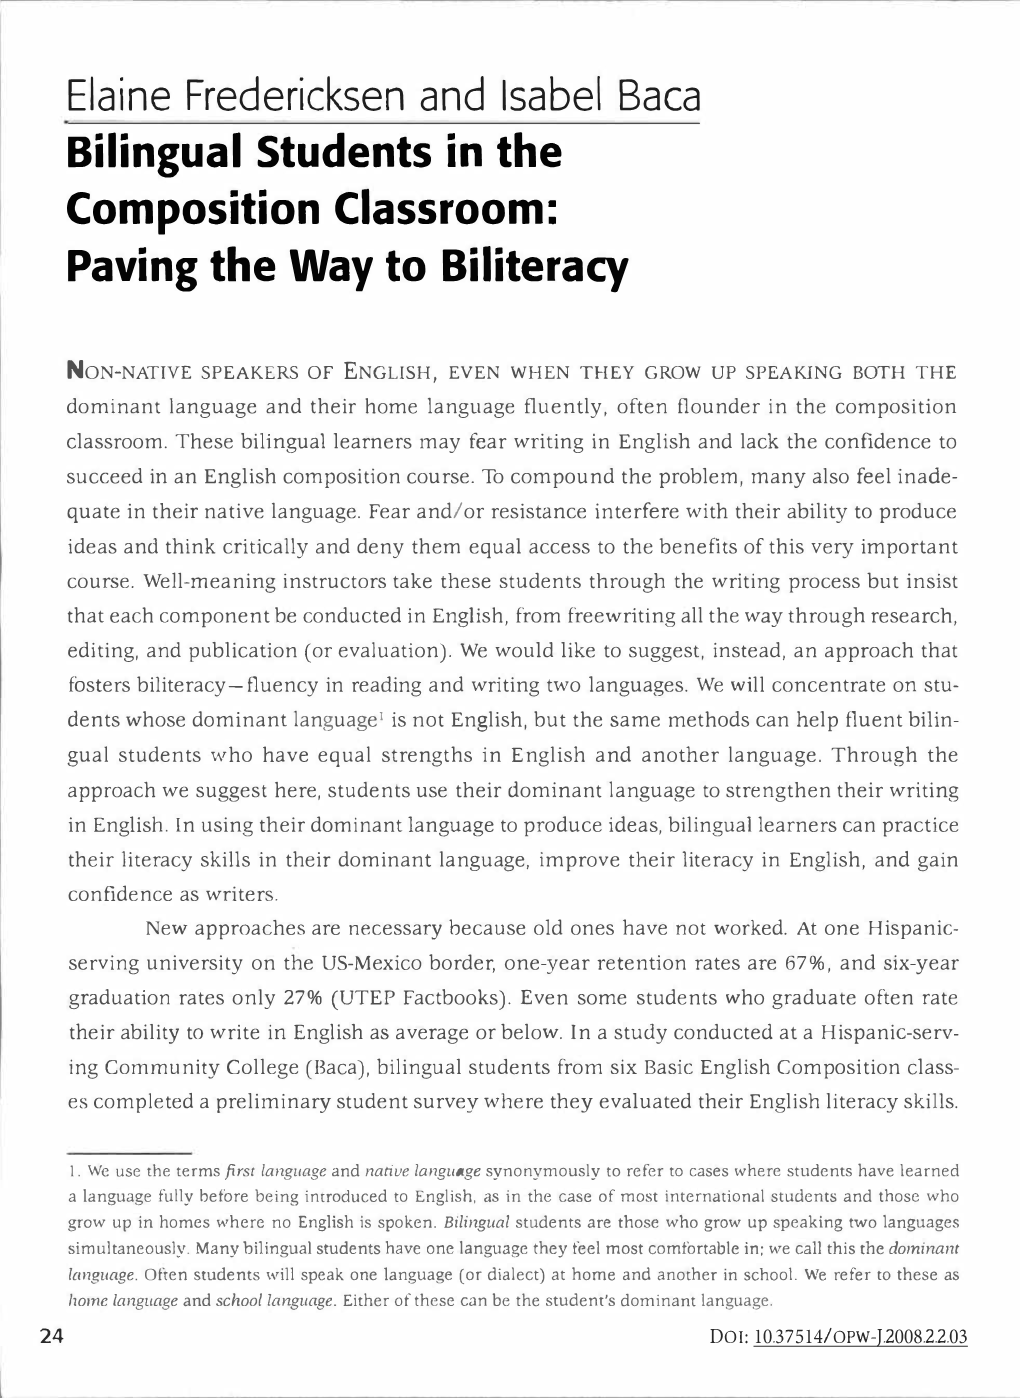 Bilingual Students in the Composition Classroom: Paving the Way to Biliteracy